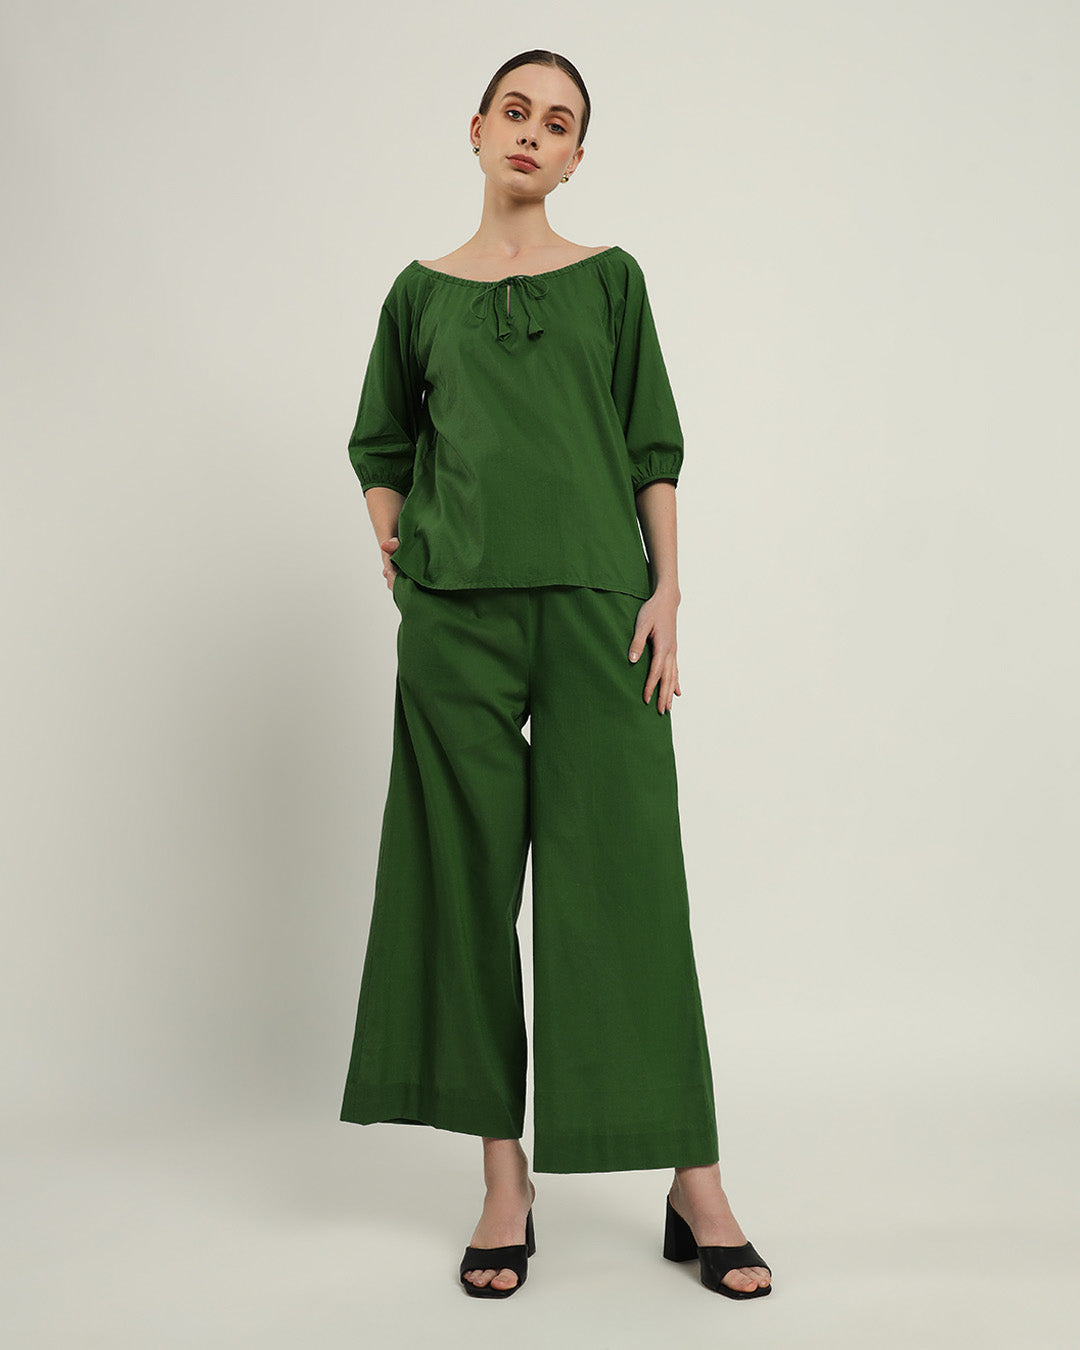 Emerald Effortless BowtNeck Top (Without Bottoms)